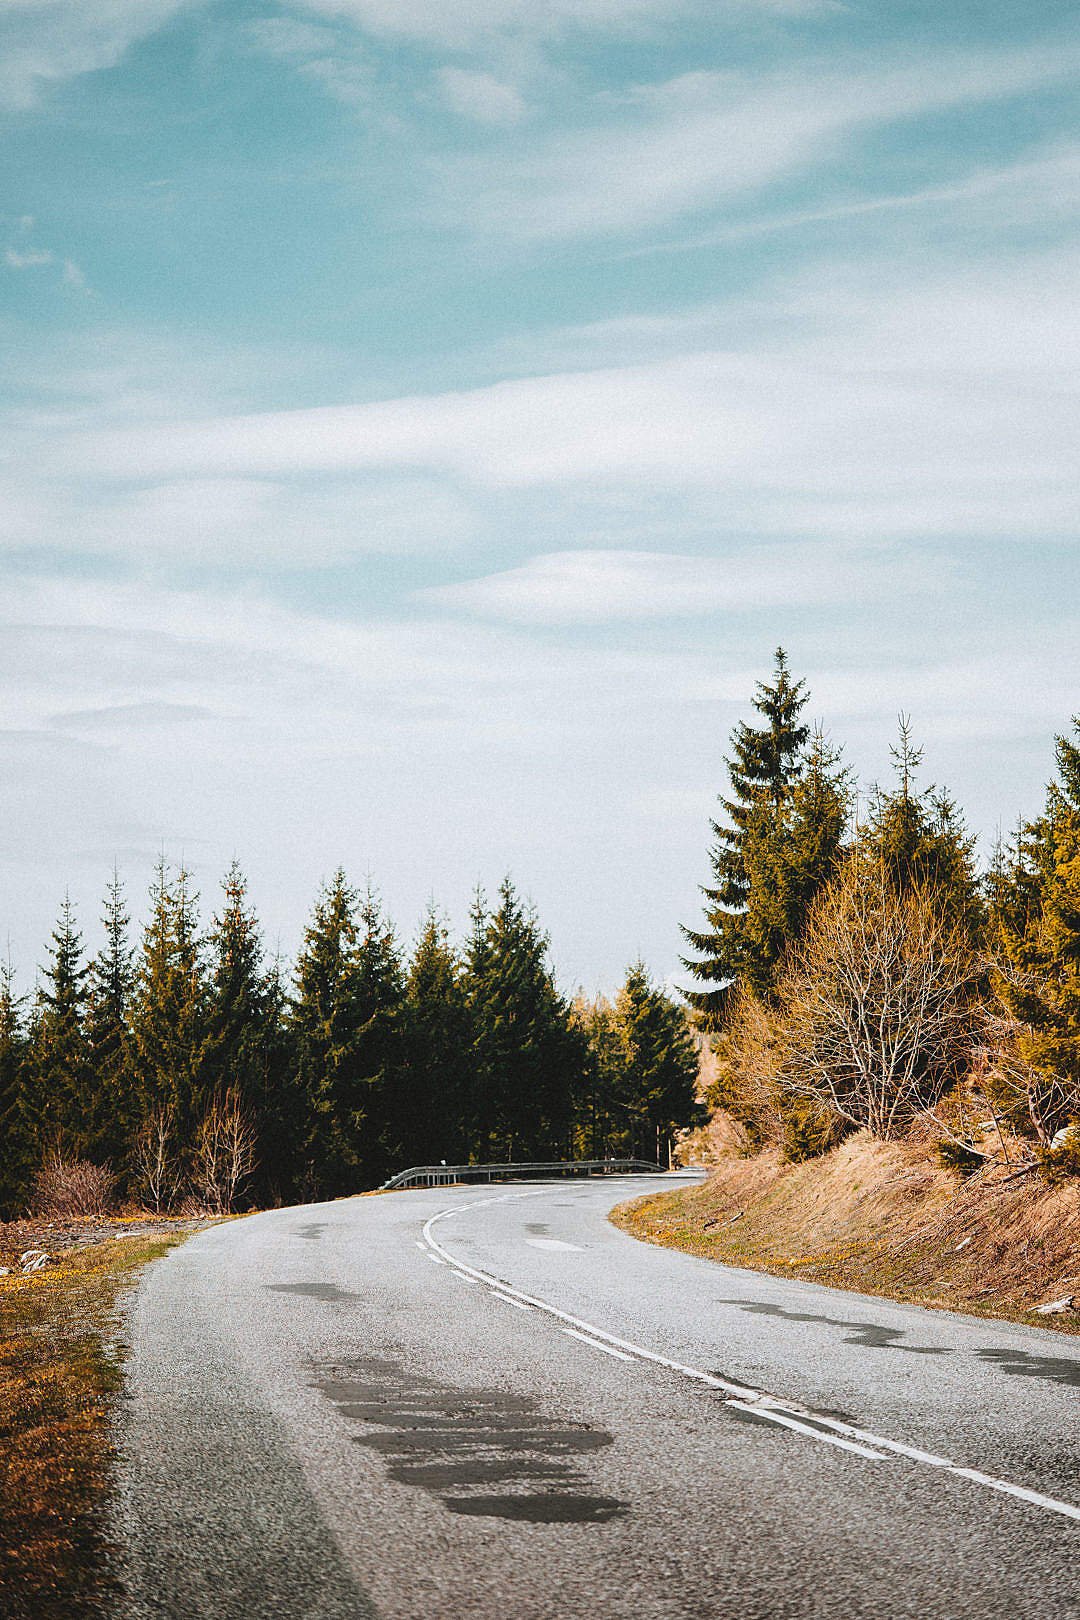 Download Asphalt Sharp Curve Road along with Forest FREE Stock Photo